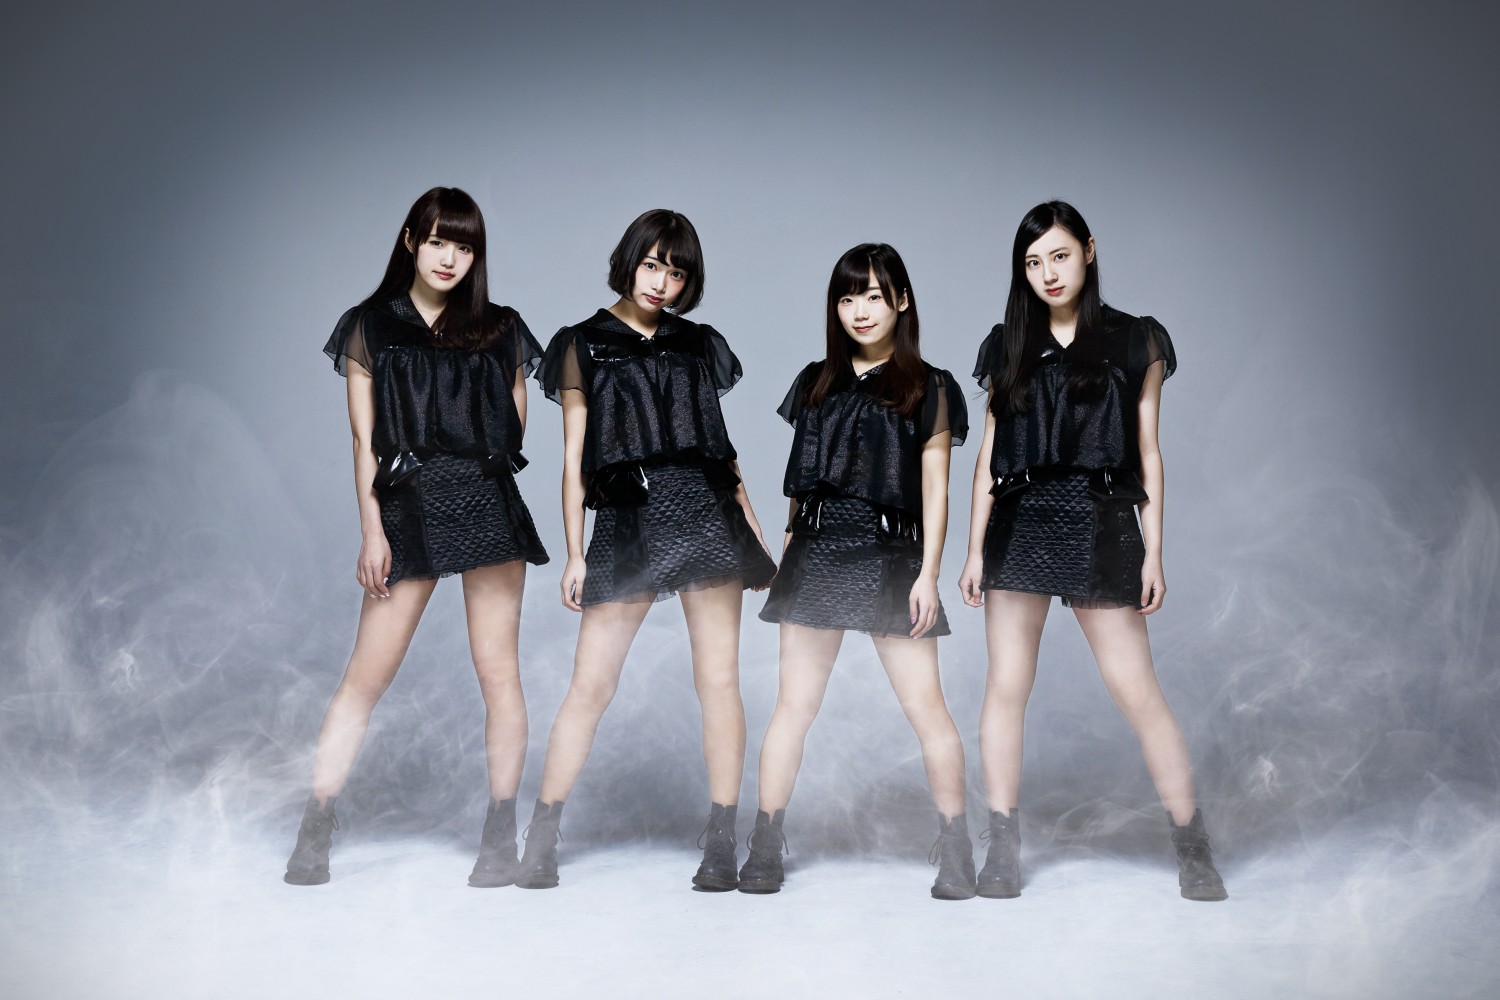 Can’t Stop Head-banging! PassCode Becomes Female Ninja in the New MV “NINJA BOMBER”